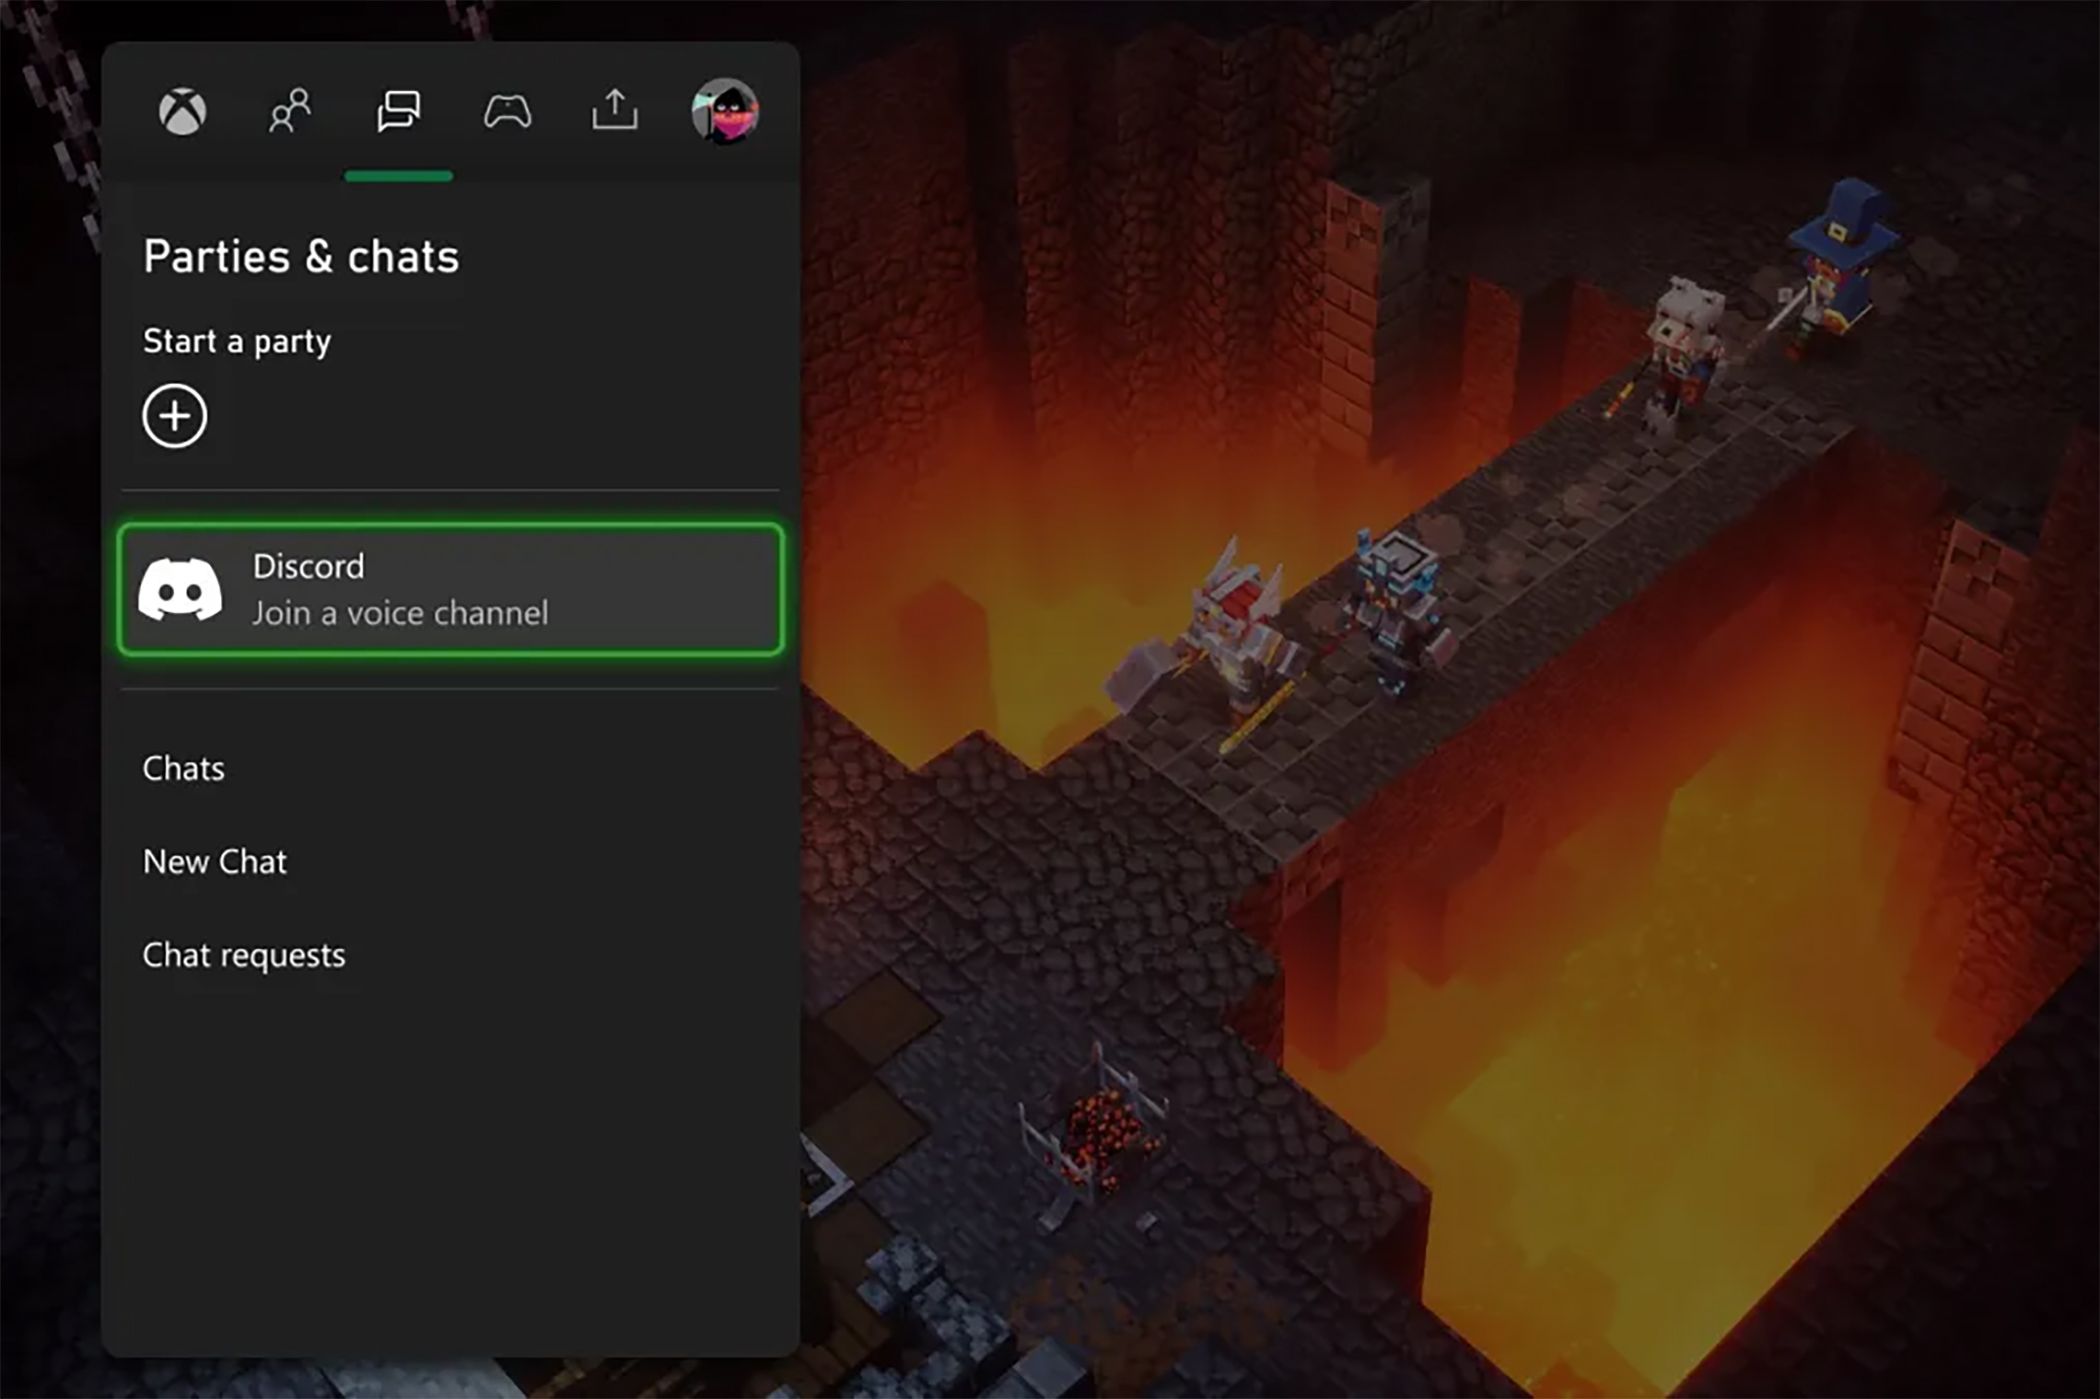 Screenshot of Xbox menu with the option to join Discord voice channels highlighted.